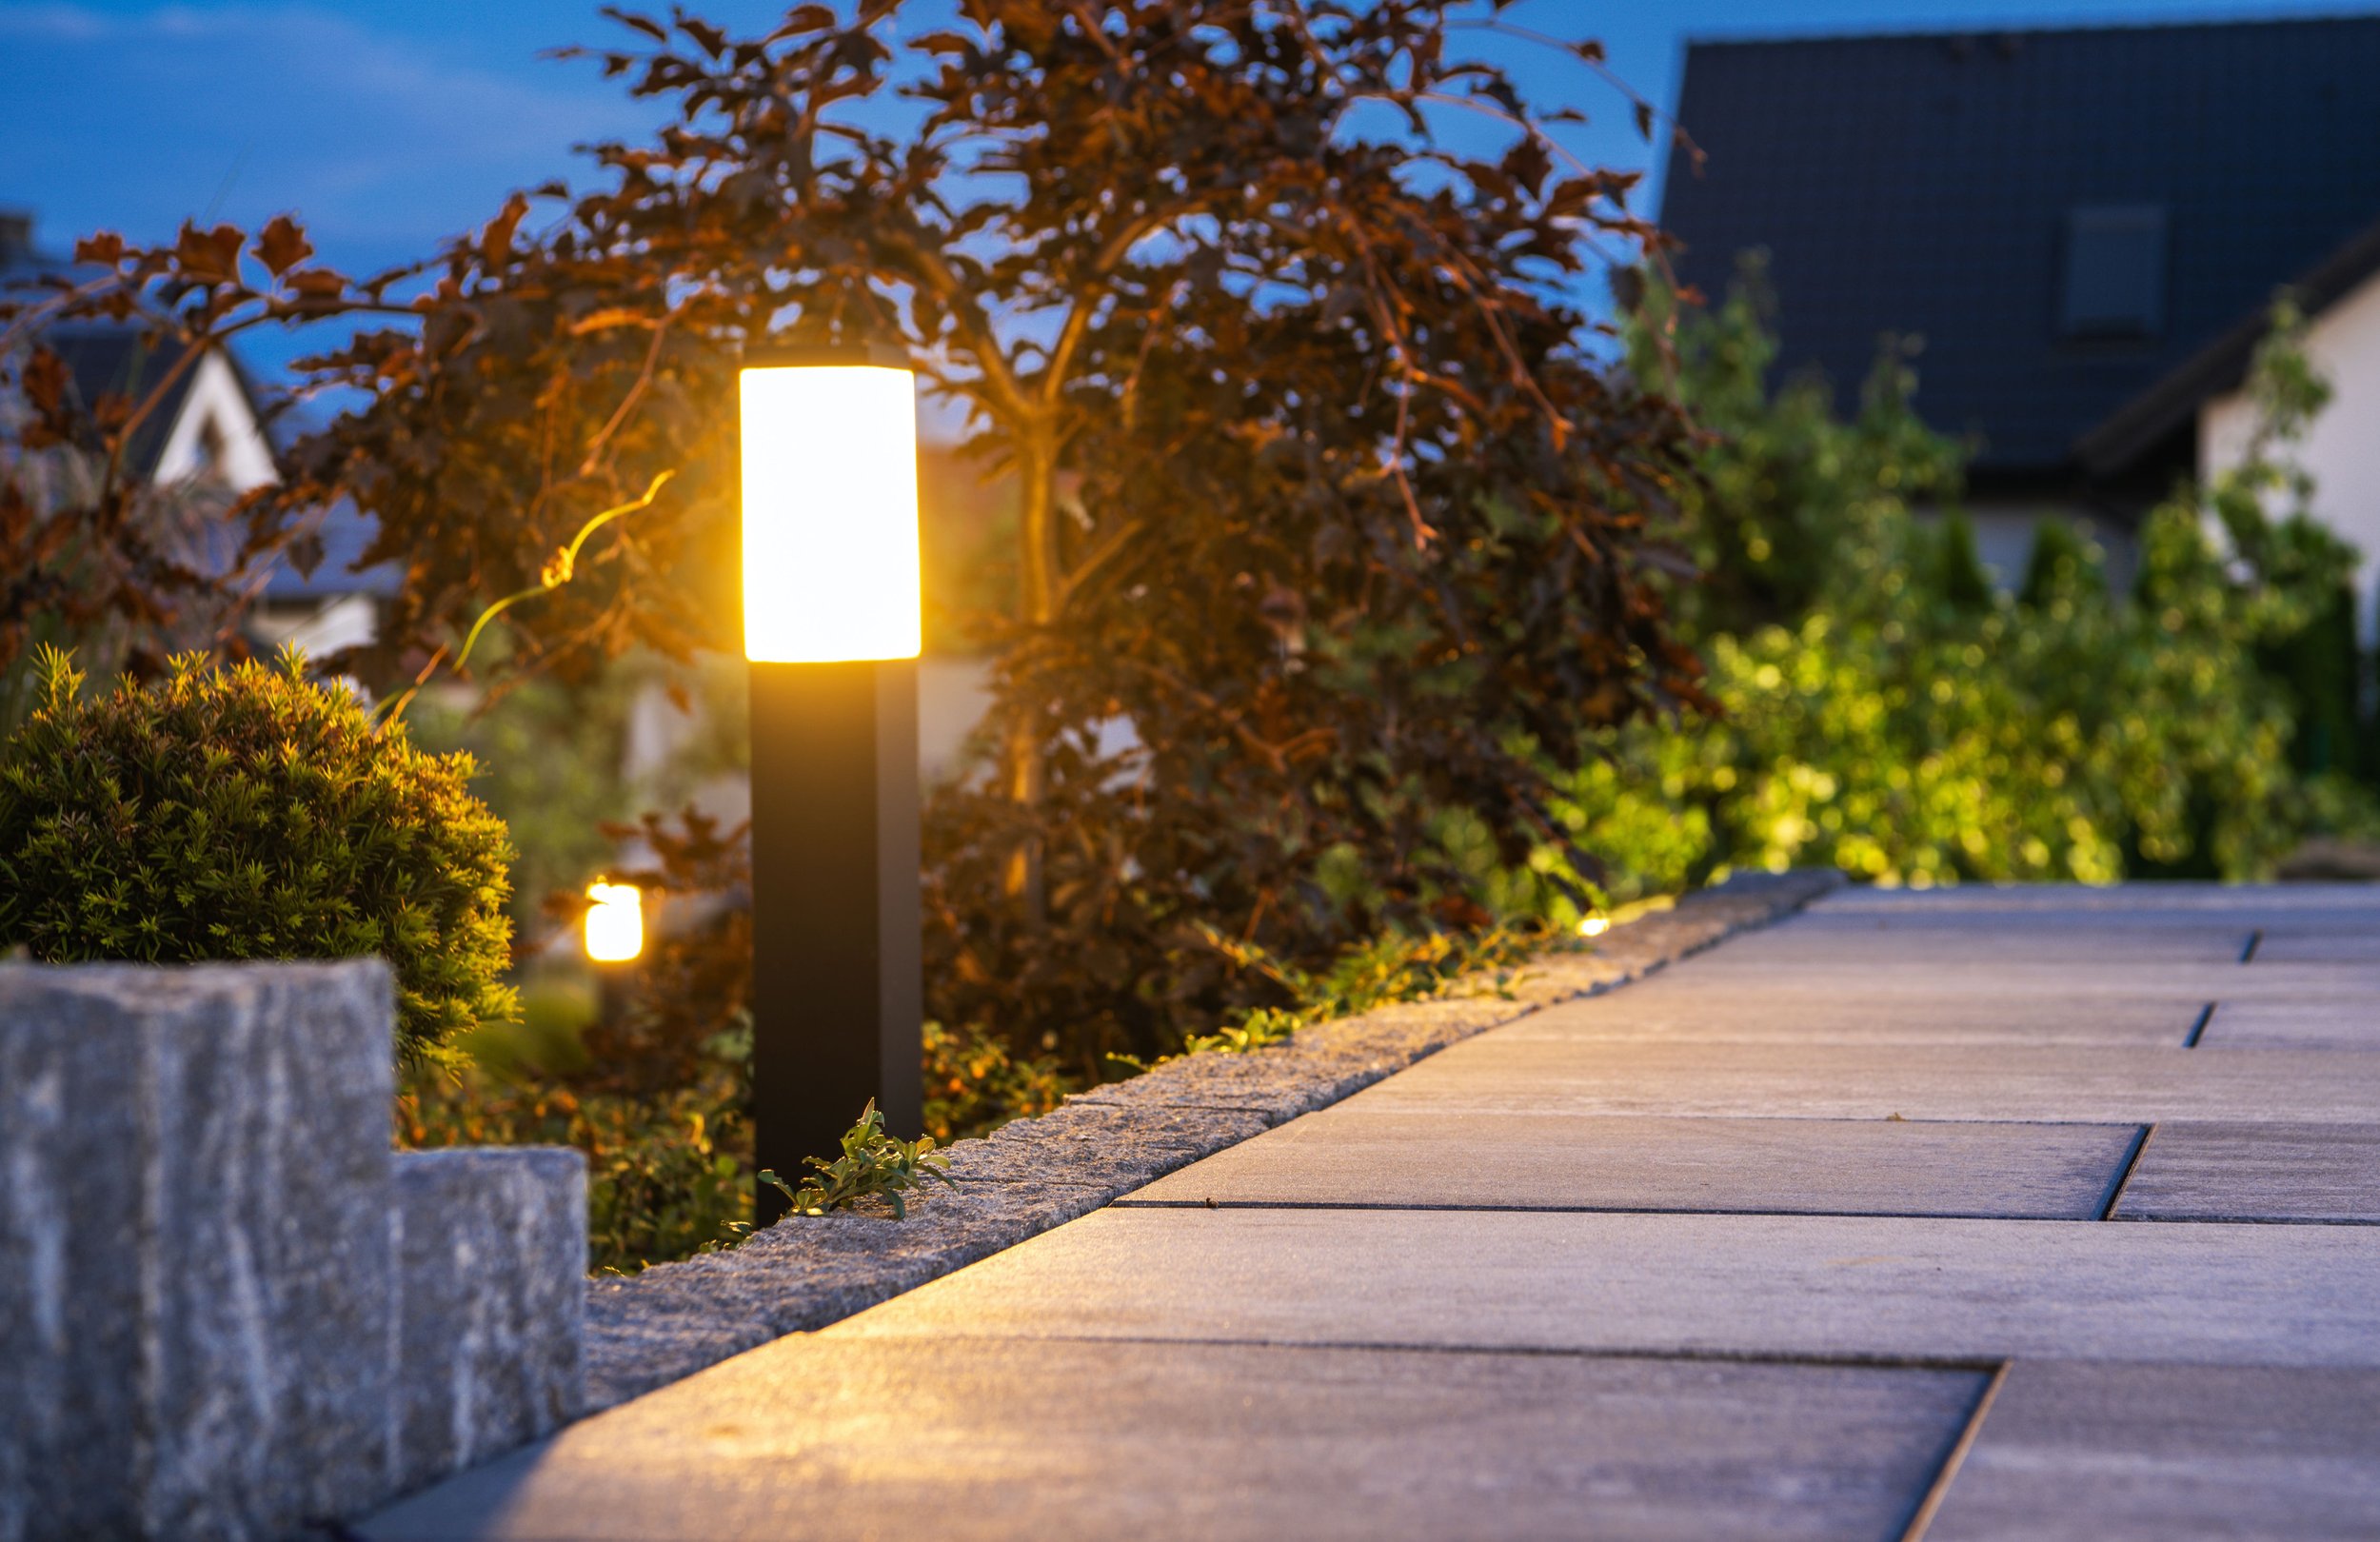 getting inspired: 6 excellent landscape lighting ideas for your